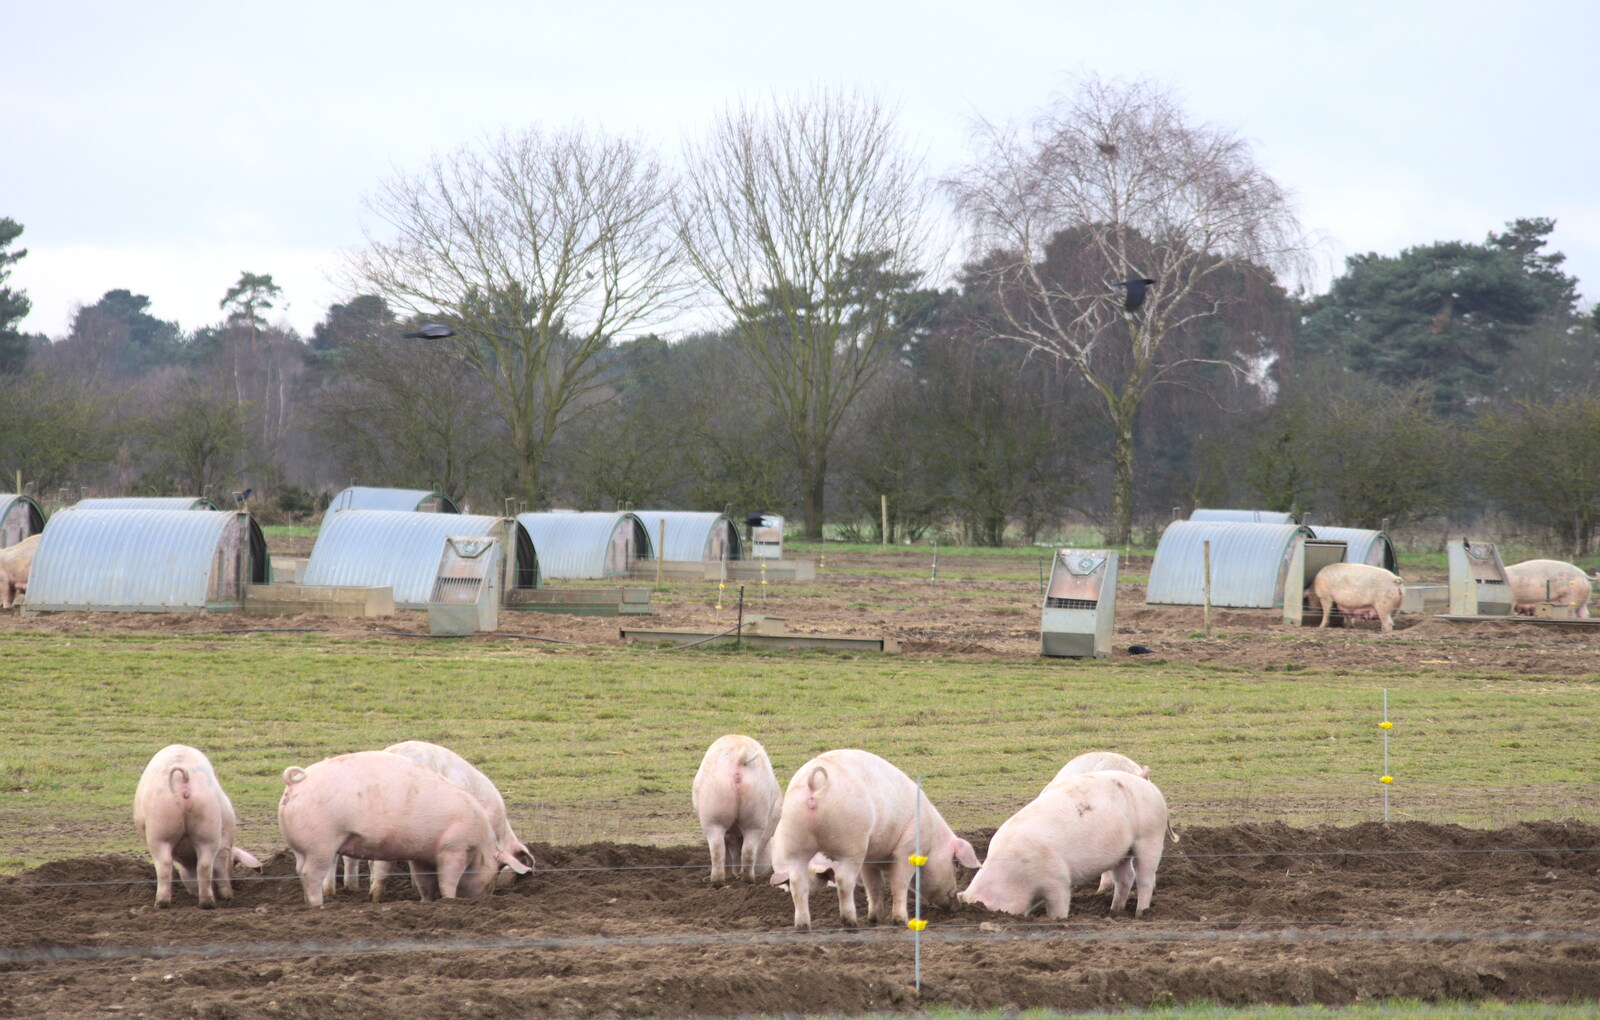 It's Pig City near the burial mounds from A Trip to Sutton Hoo, Woodbridge, Suffolk - 29th January 2017